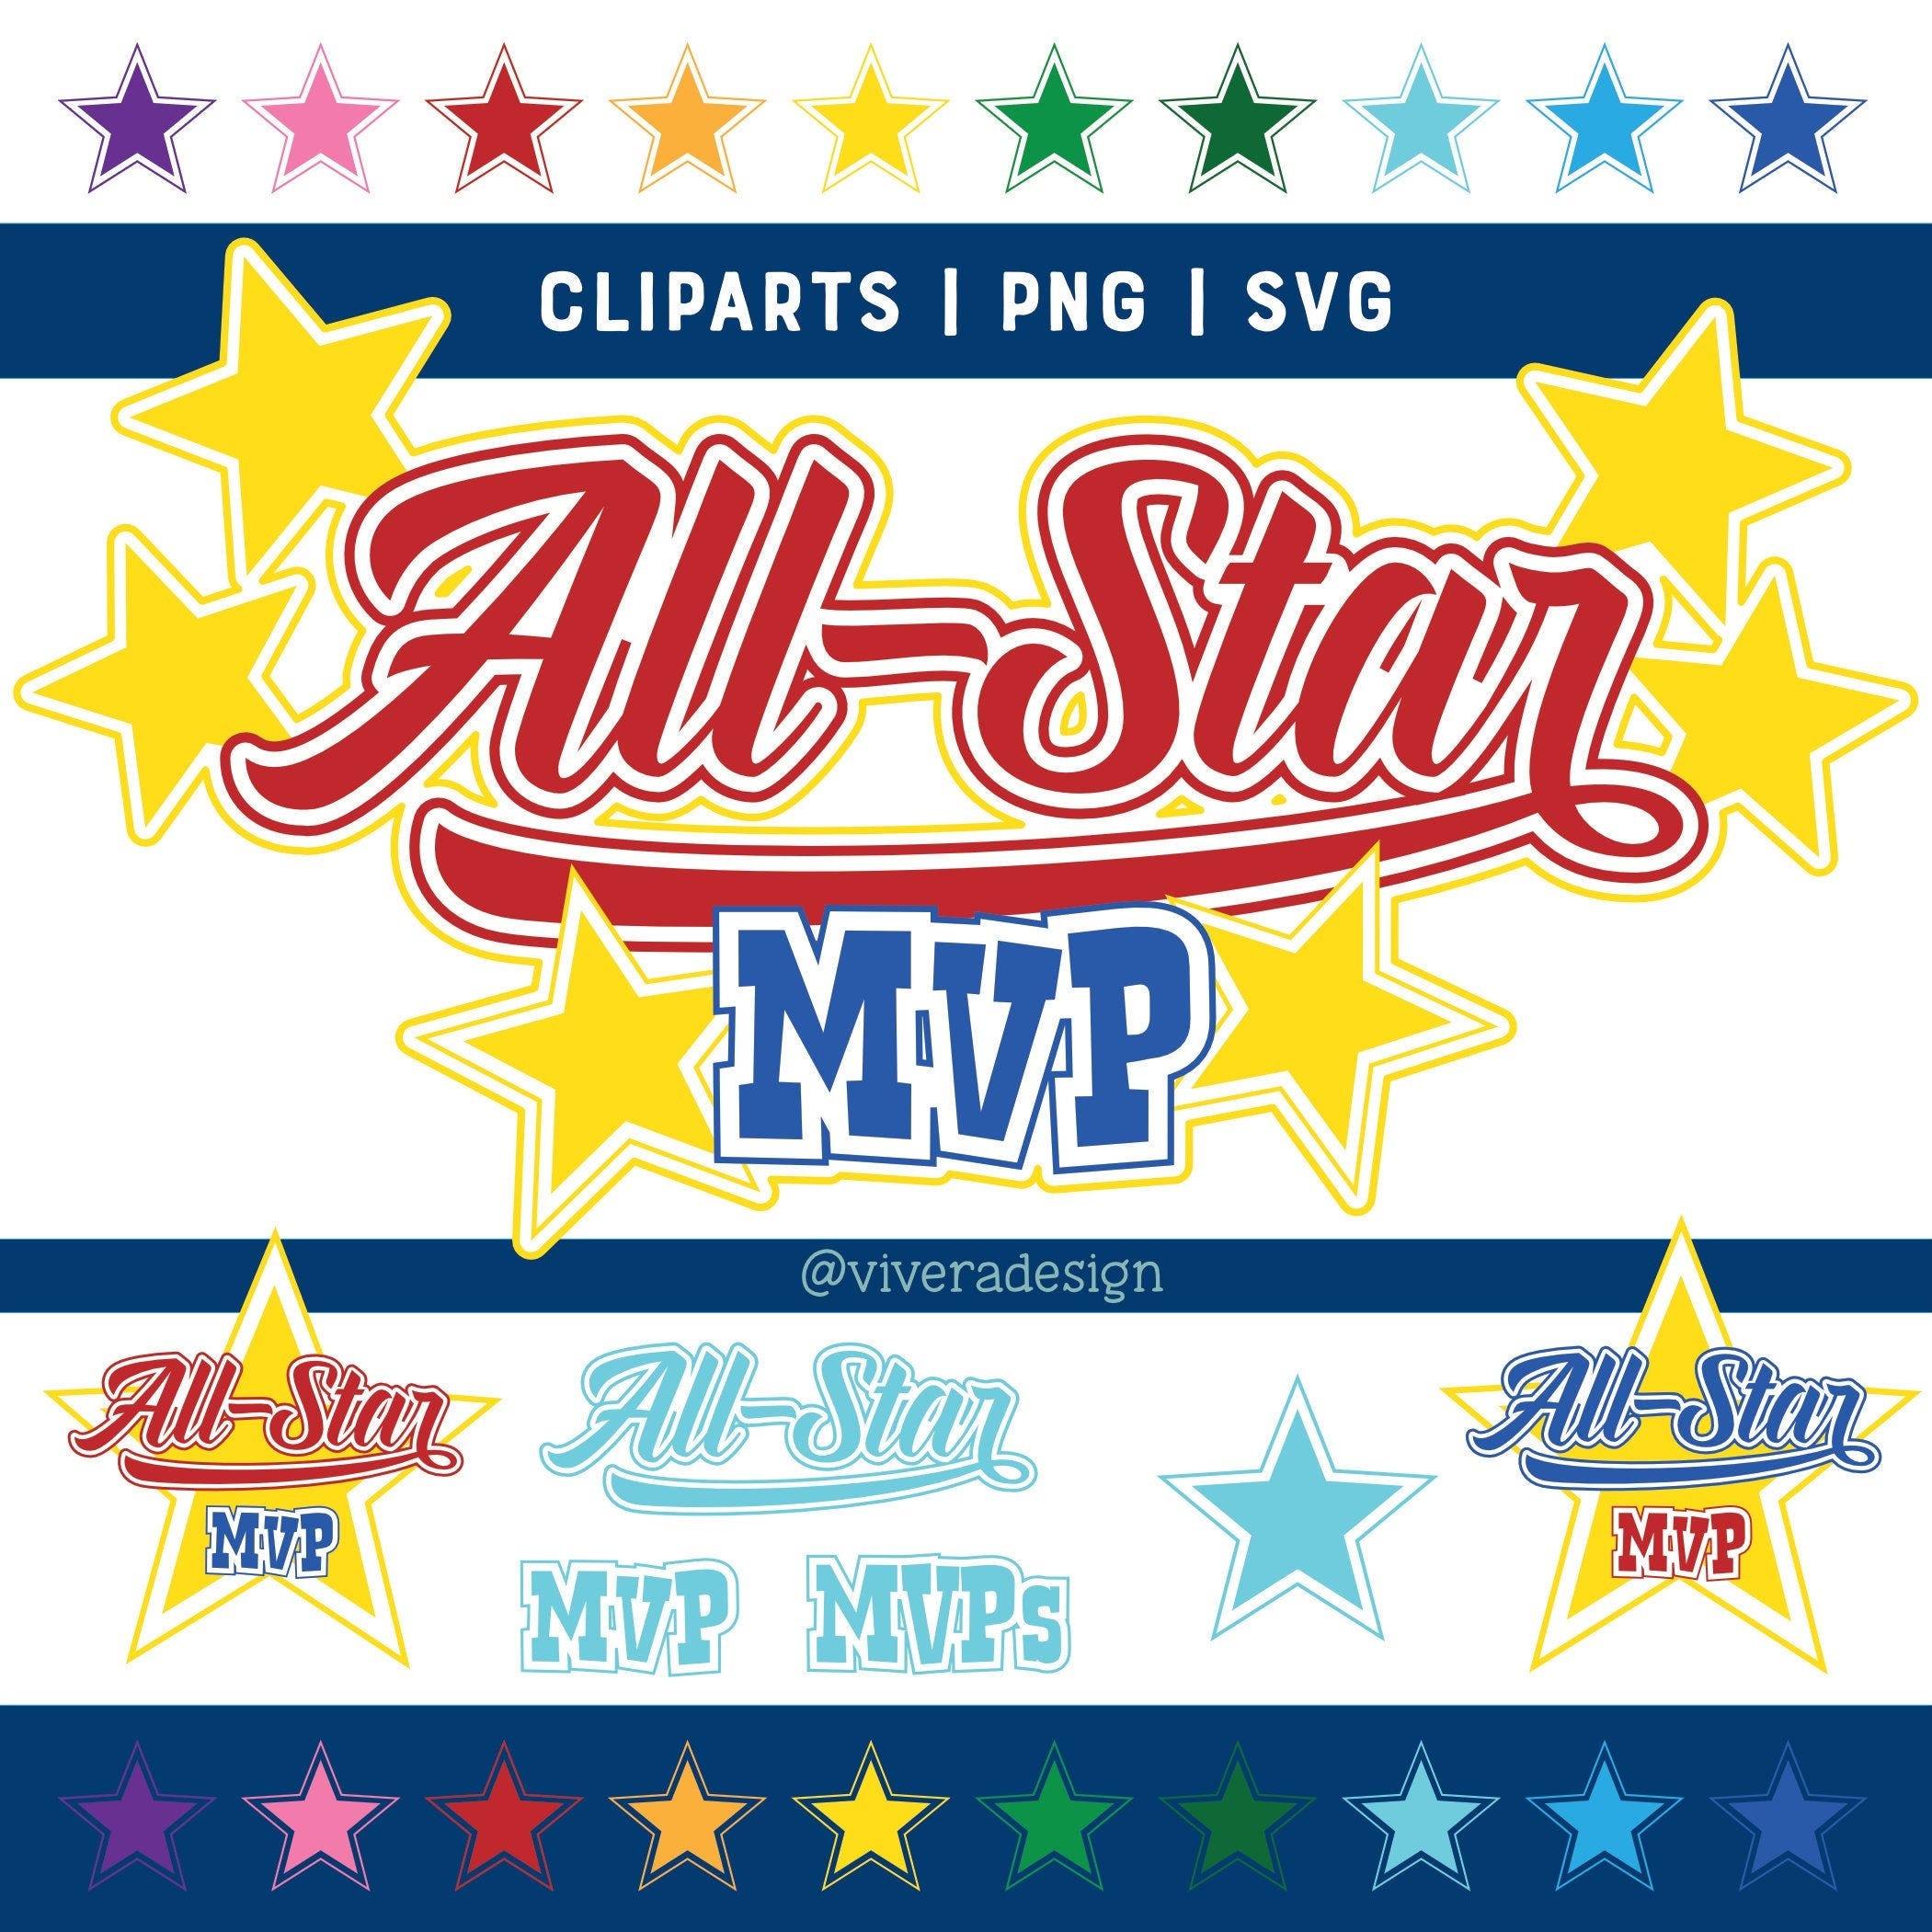 Digital Clip Art - All-Star, MVP, and Stars Cliparts - SVG | PNG | Sports Clipart |